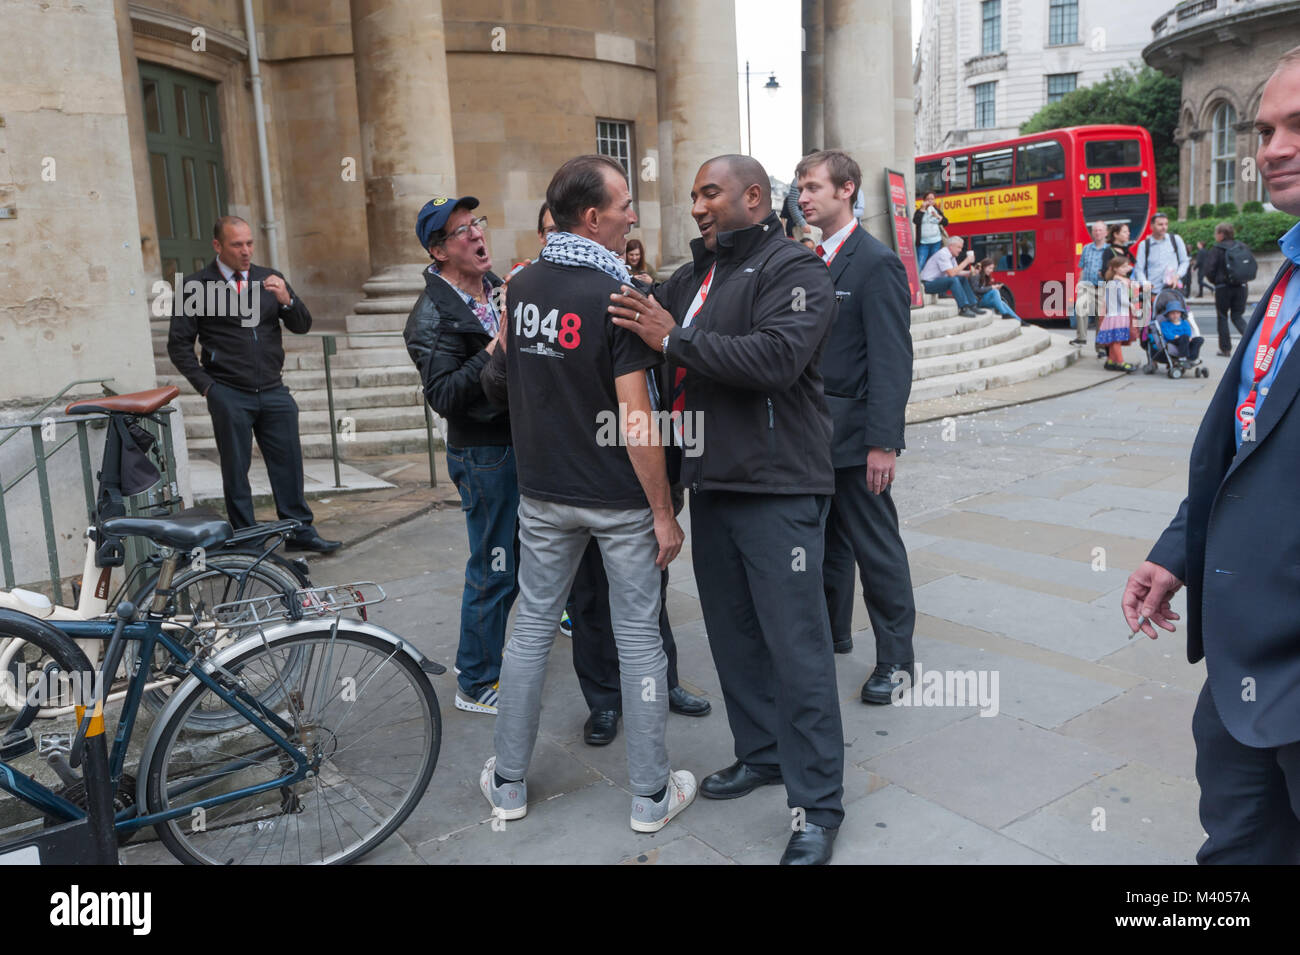 Security outside the BBC try to calm a man who argued with protesters calling on the BBC to report fairly about the illegal detention of Palestinians including the two hunger strikers. Stock Photo